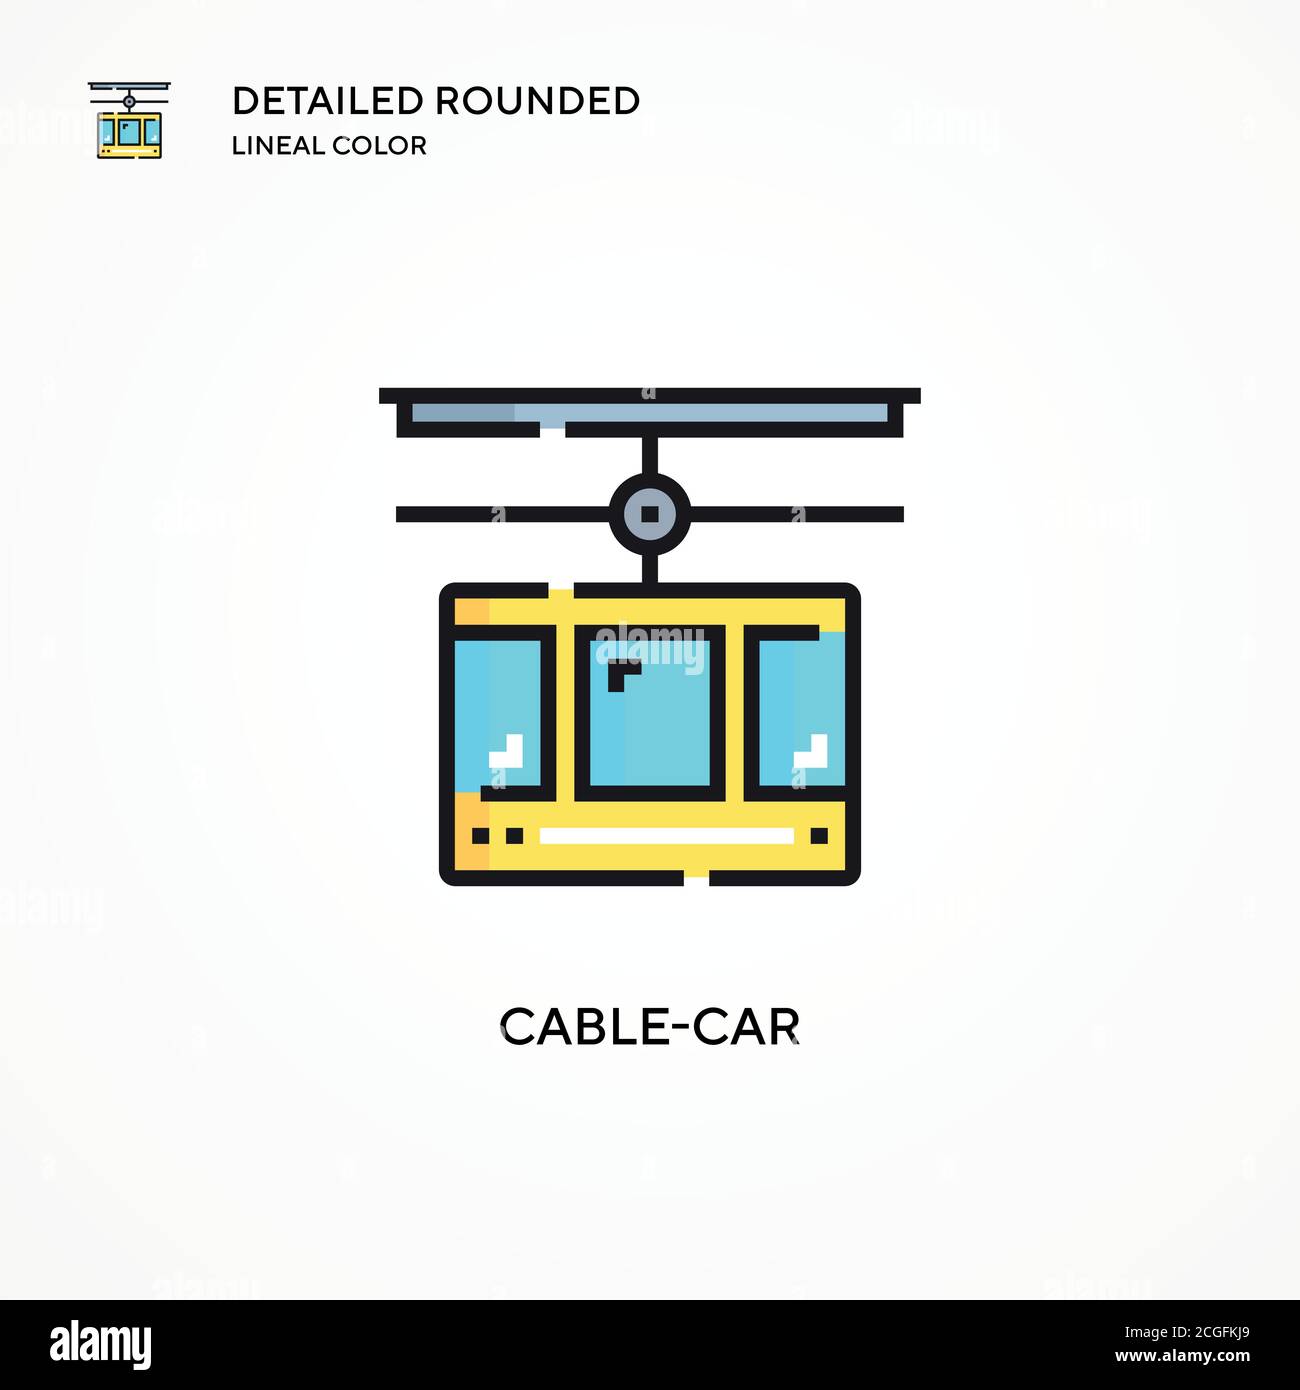 Cable-car vector icon. Modern vector illustration concepts. Easy to edit and customize. Stock Vector